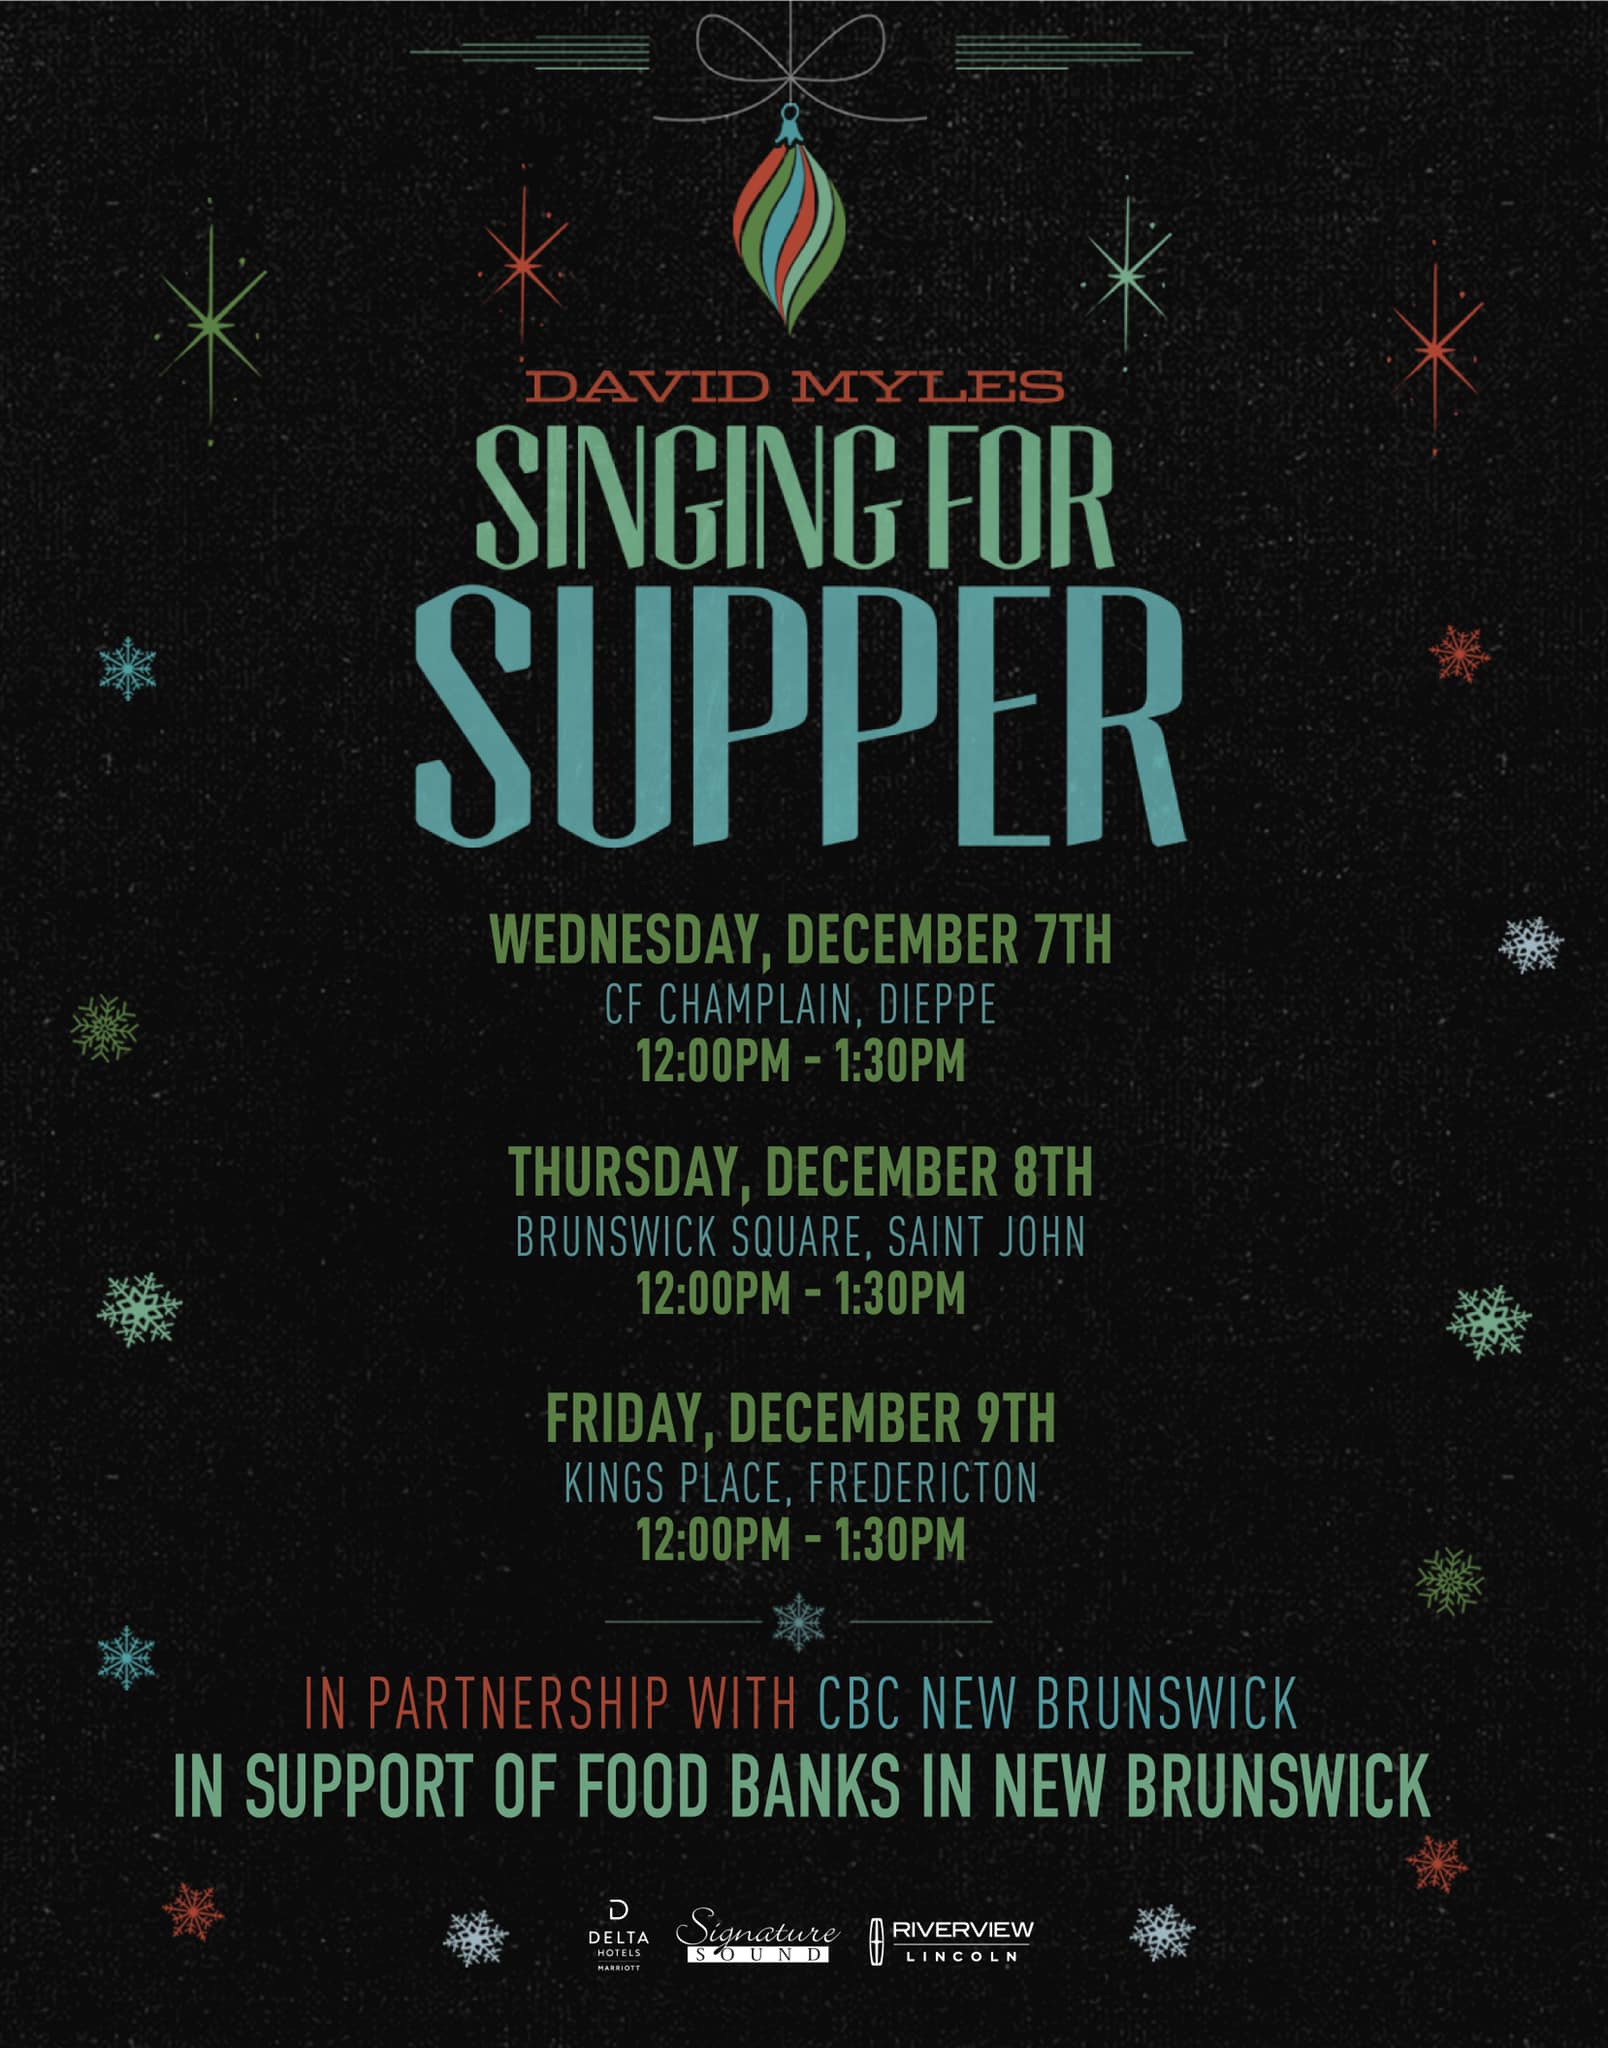 David Myles Singing for Supper. Wednesday, December 7th, CF Champlain, Dieppe. 12pm-1:30pm; Thursday, December 8th, Brunswick Square, Saint John 12pm - 1:30pm; Friday, December 9th, Kings Place, Fredericton, 12-1:30pm. In partnership with CBC New Brunswick in support of food banks in New Brunswick.